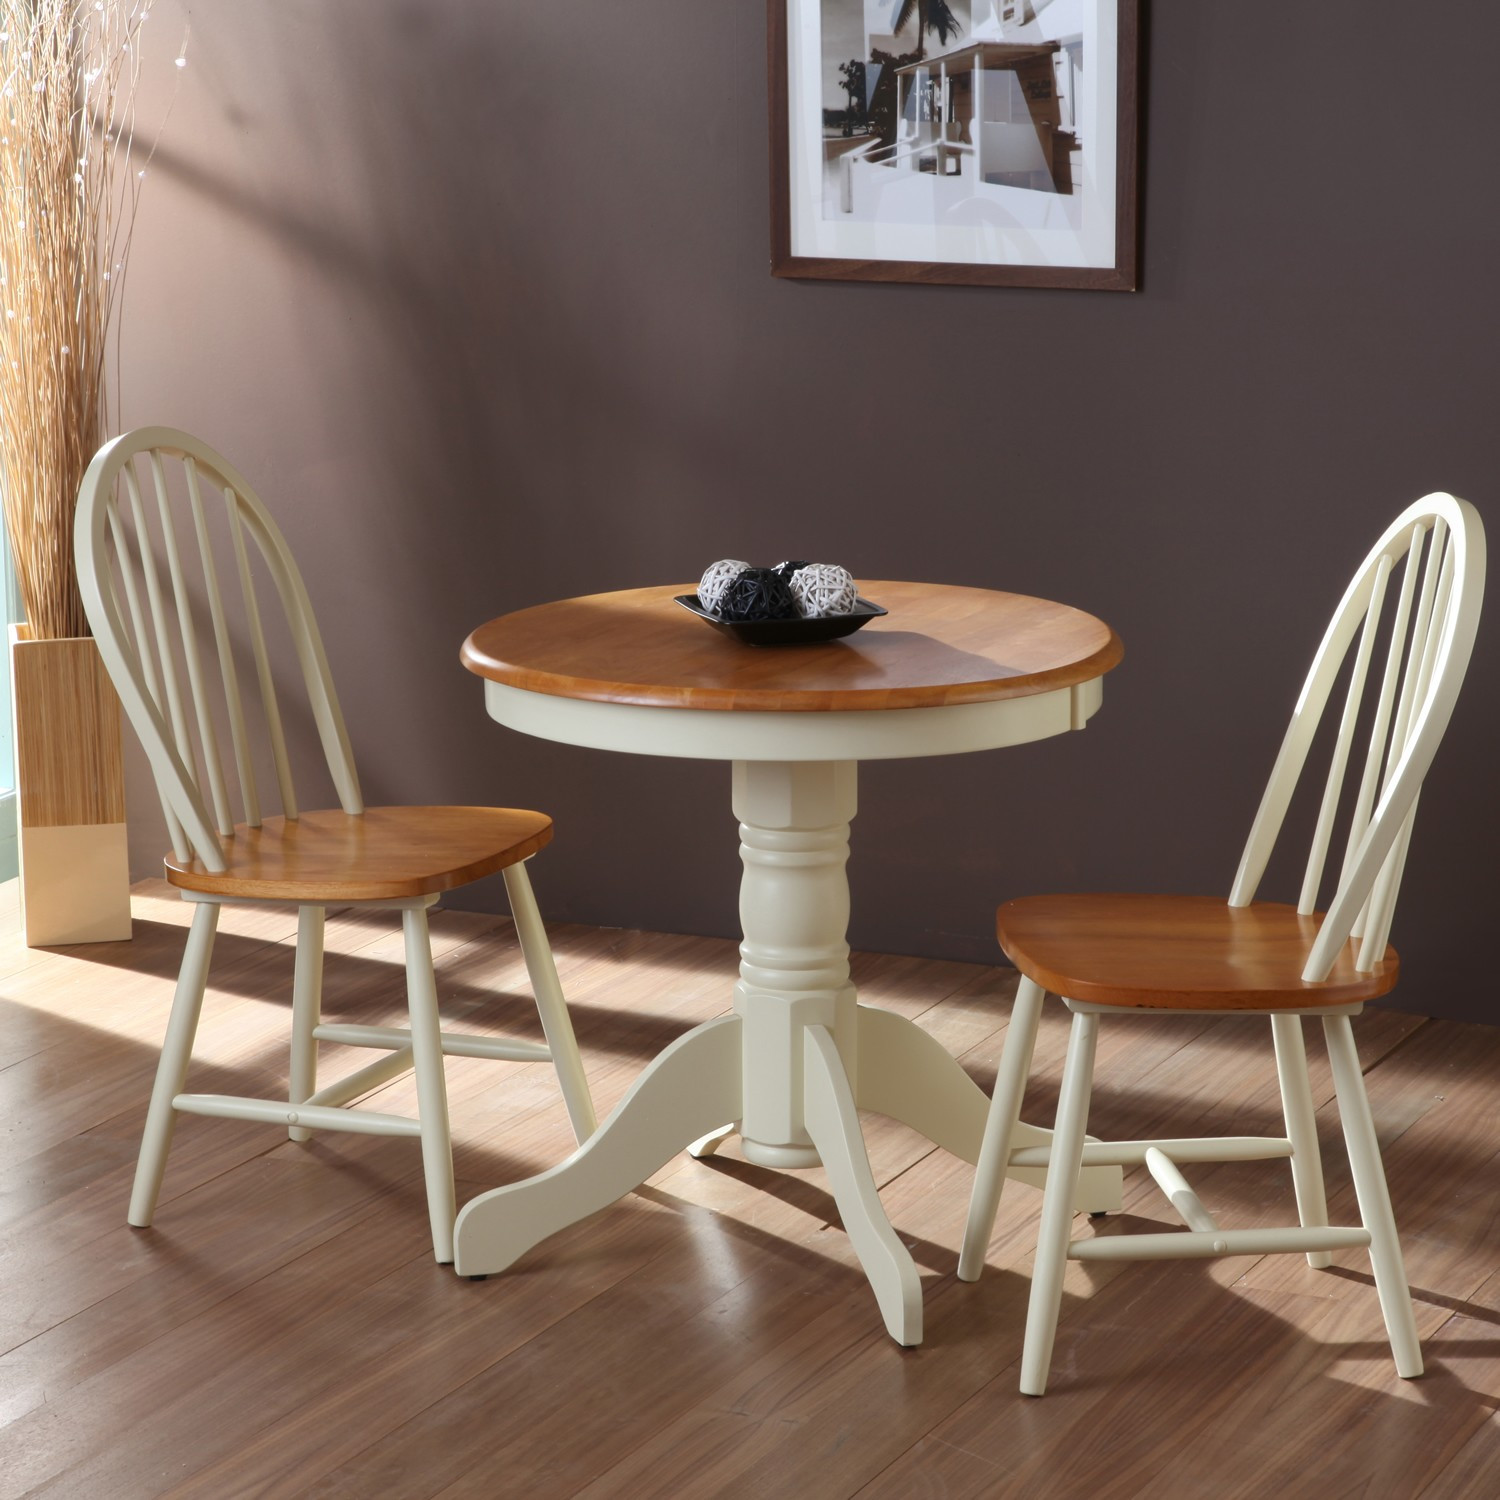 Small Kitchen Table For 2
 Beautiful White Round Kitchen Table and Chairs – HomesFeed